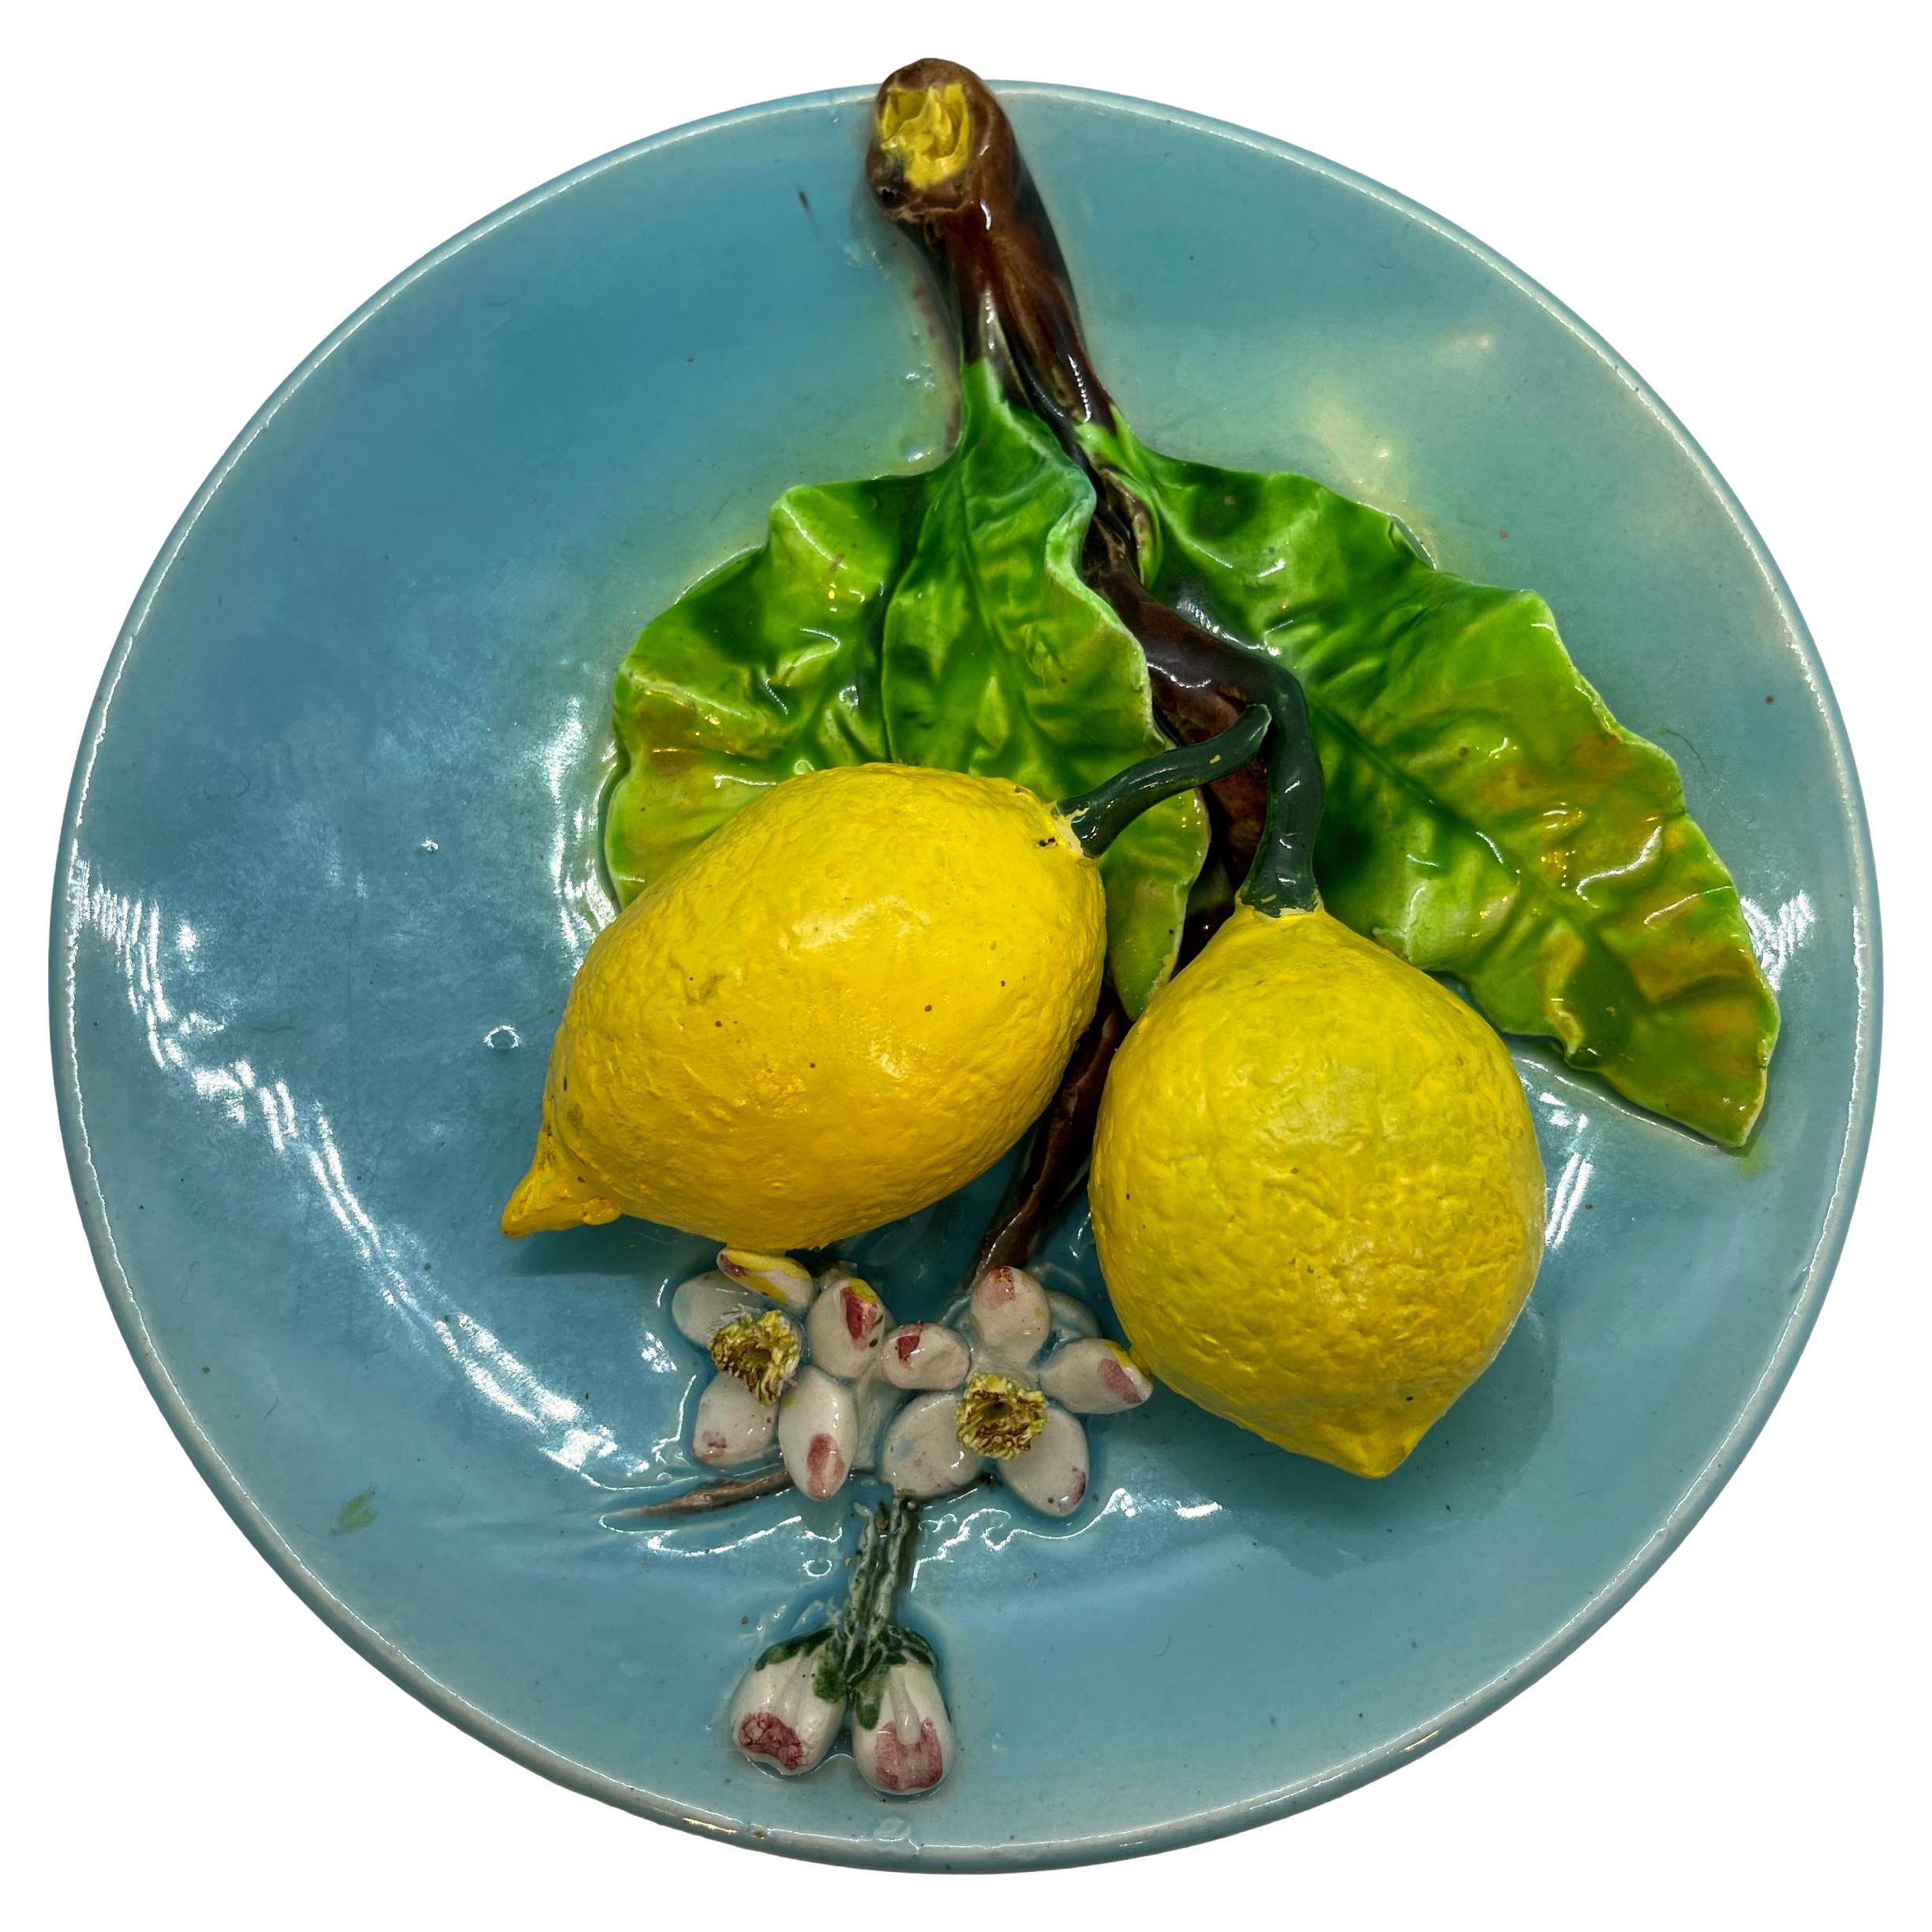 French Majolica Trompe L'oeil Wall Plaque with Lemons, Perret-Gentil, Menton